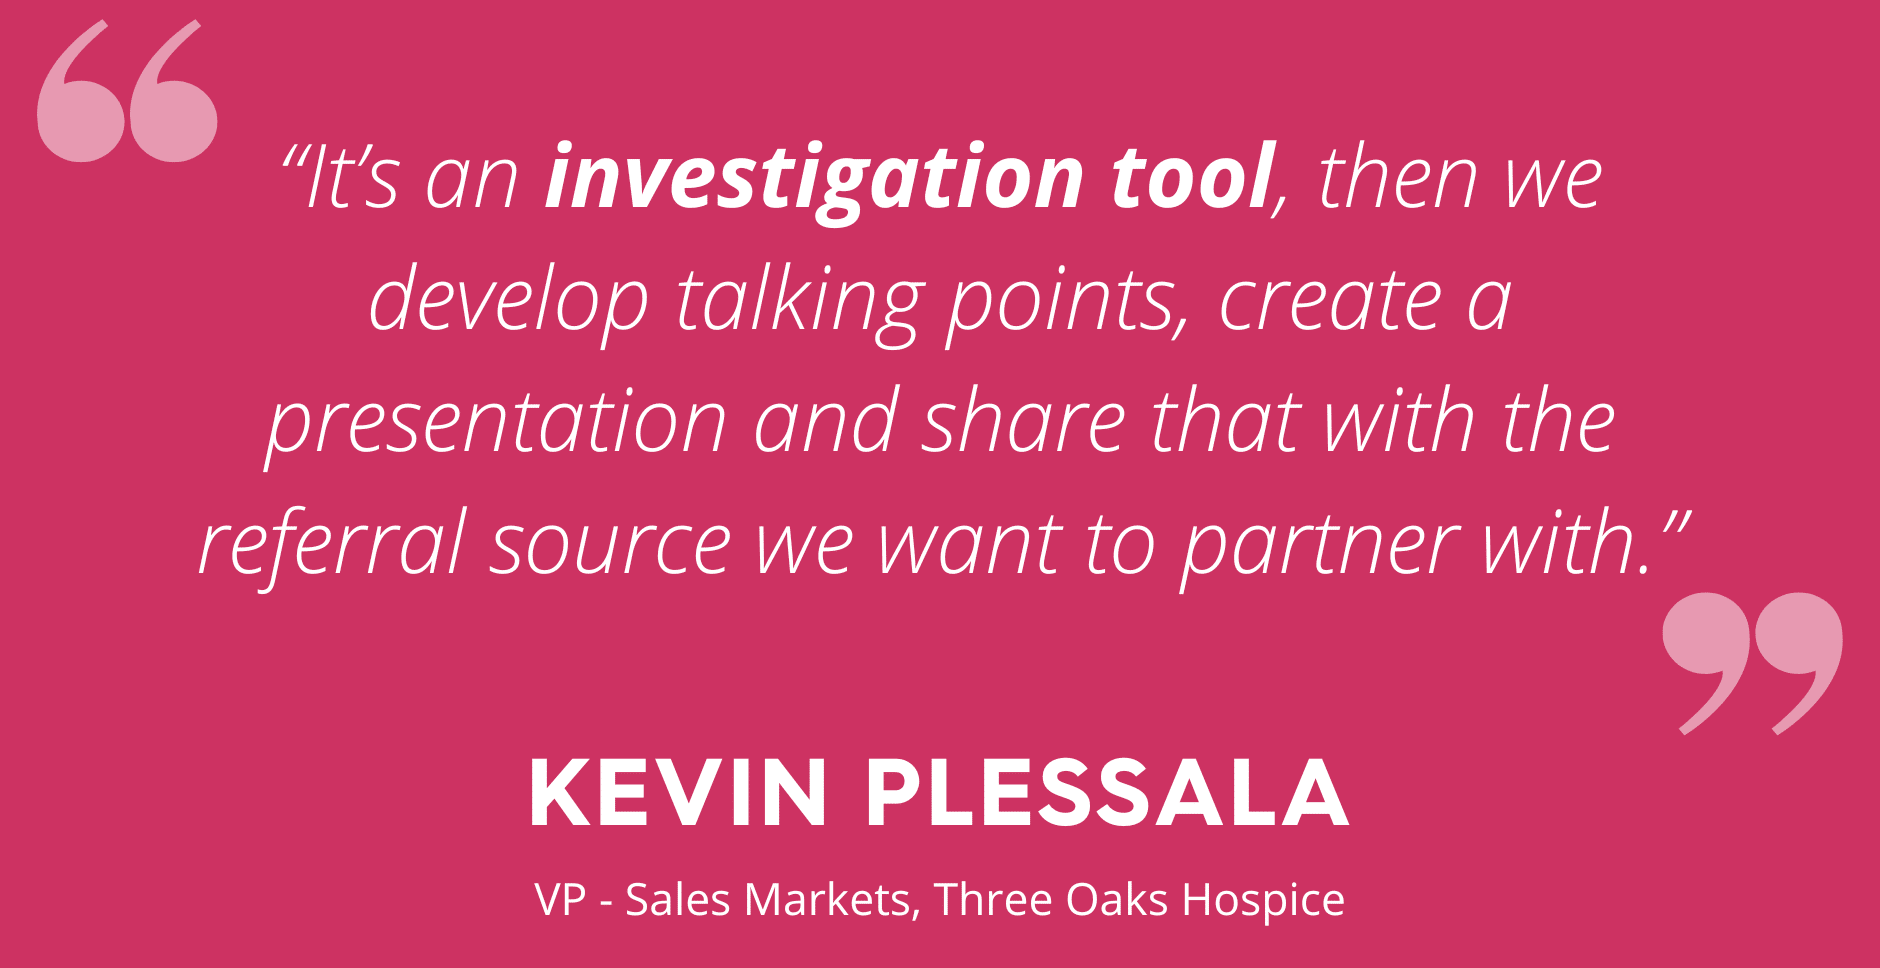 pink background with white text saying "It's an investigation tool, then we developp talking points, create a presentation and share that with the referral source we want to partner with." Quoted by Kevin Plessala - VP of Sales Markets at Three Oaks Hospice